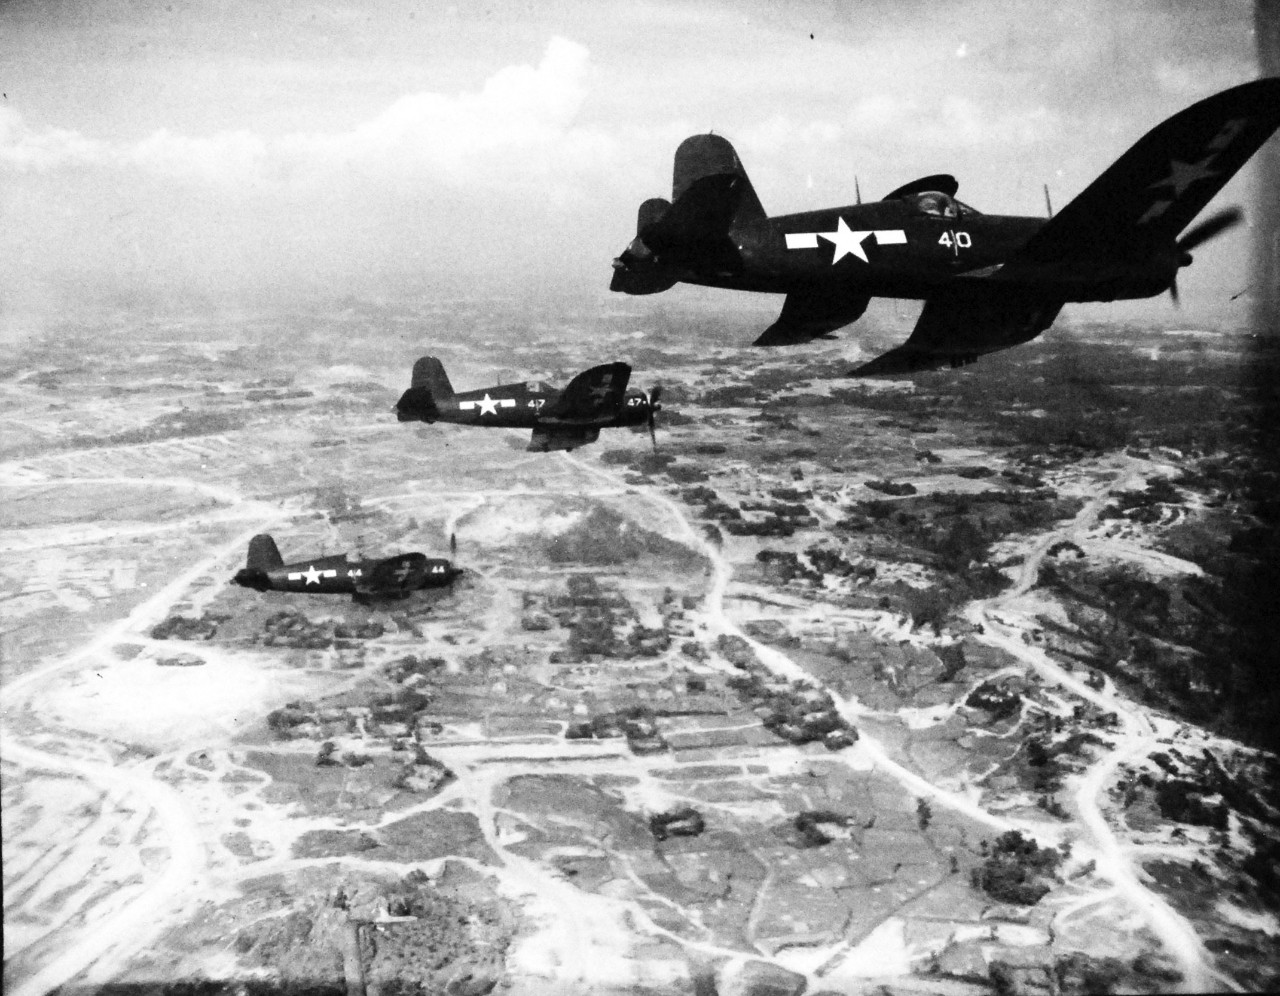 127-GW-524-128521:  Okinawa Campaign, April-June 1945.   F4U “Corsairs” of the “Death Rattlers” Fighter Squadron, VMF-323, in various formations on a rocket strike against Japanese positions south of the front lines on Okinawa.  The “Rattlers” were commanded b Okinawa Campaign, April-June 1945.   y Major George A. Axtell, Jr, circa 1945.  Official U.S. Navy Photograph, now in the collections of the National Archives.   (2014/6/25). 